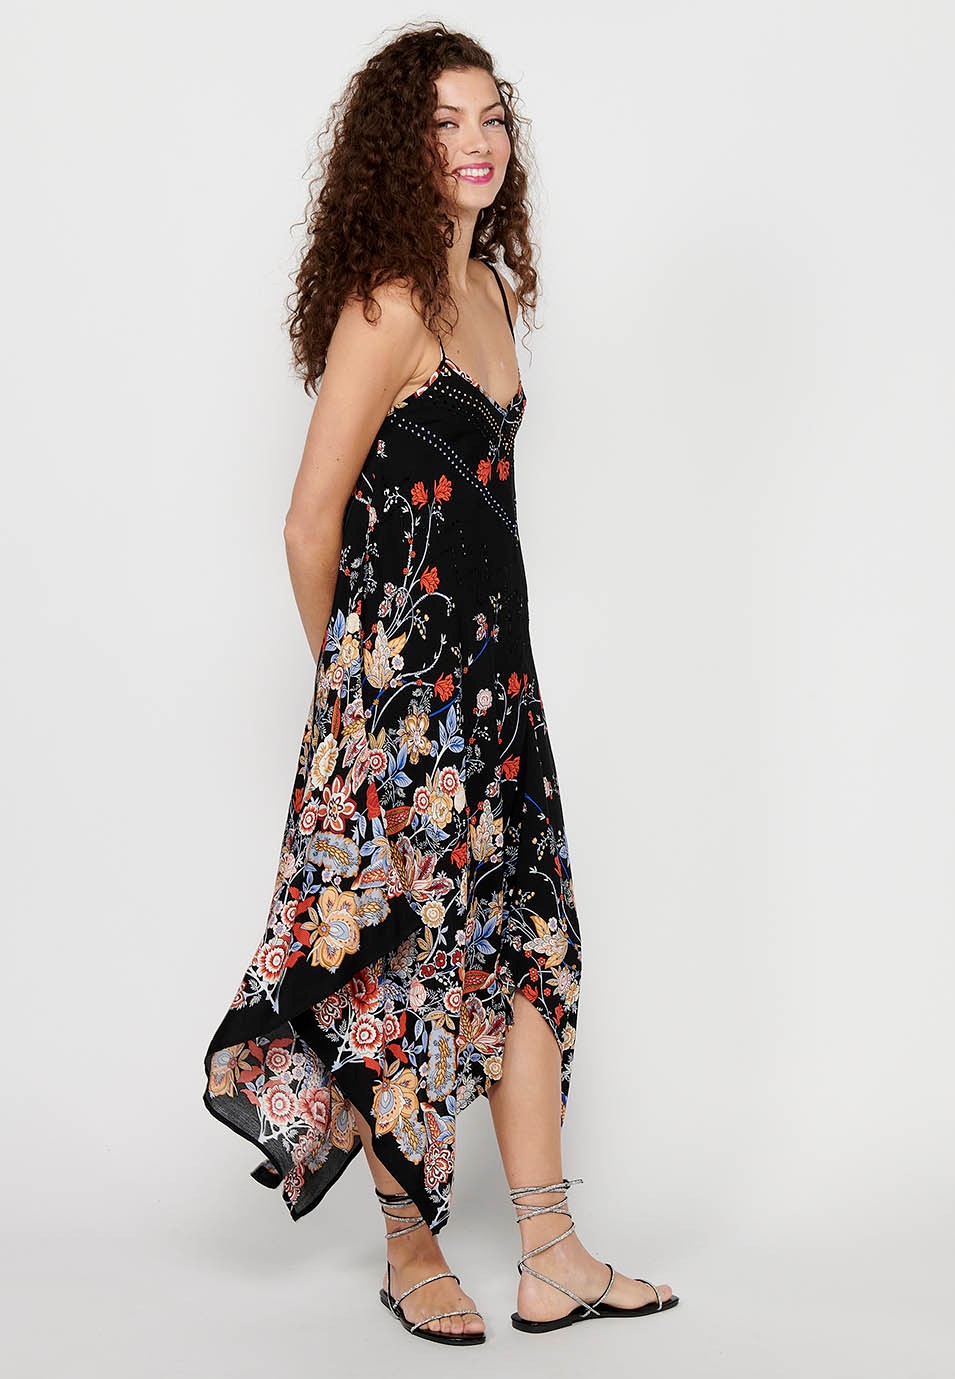 Strap Dress with V-neck and Black Floral Print for Women 5